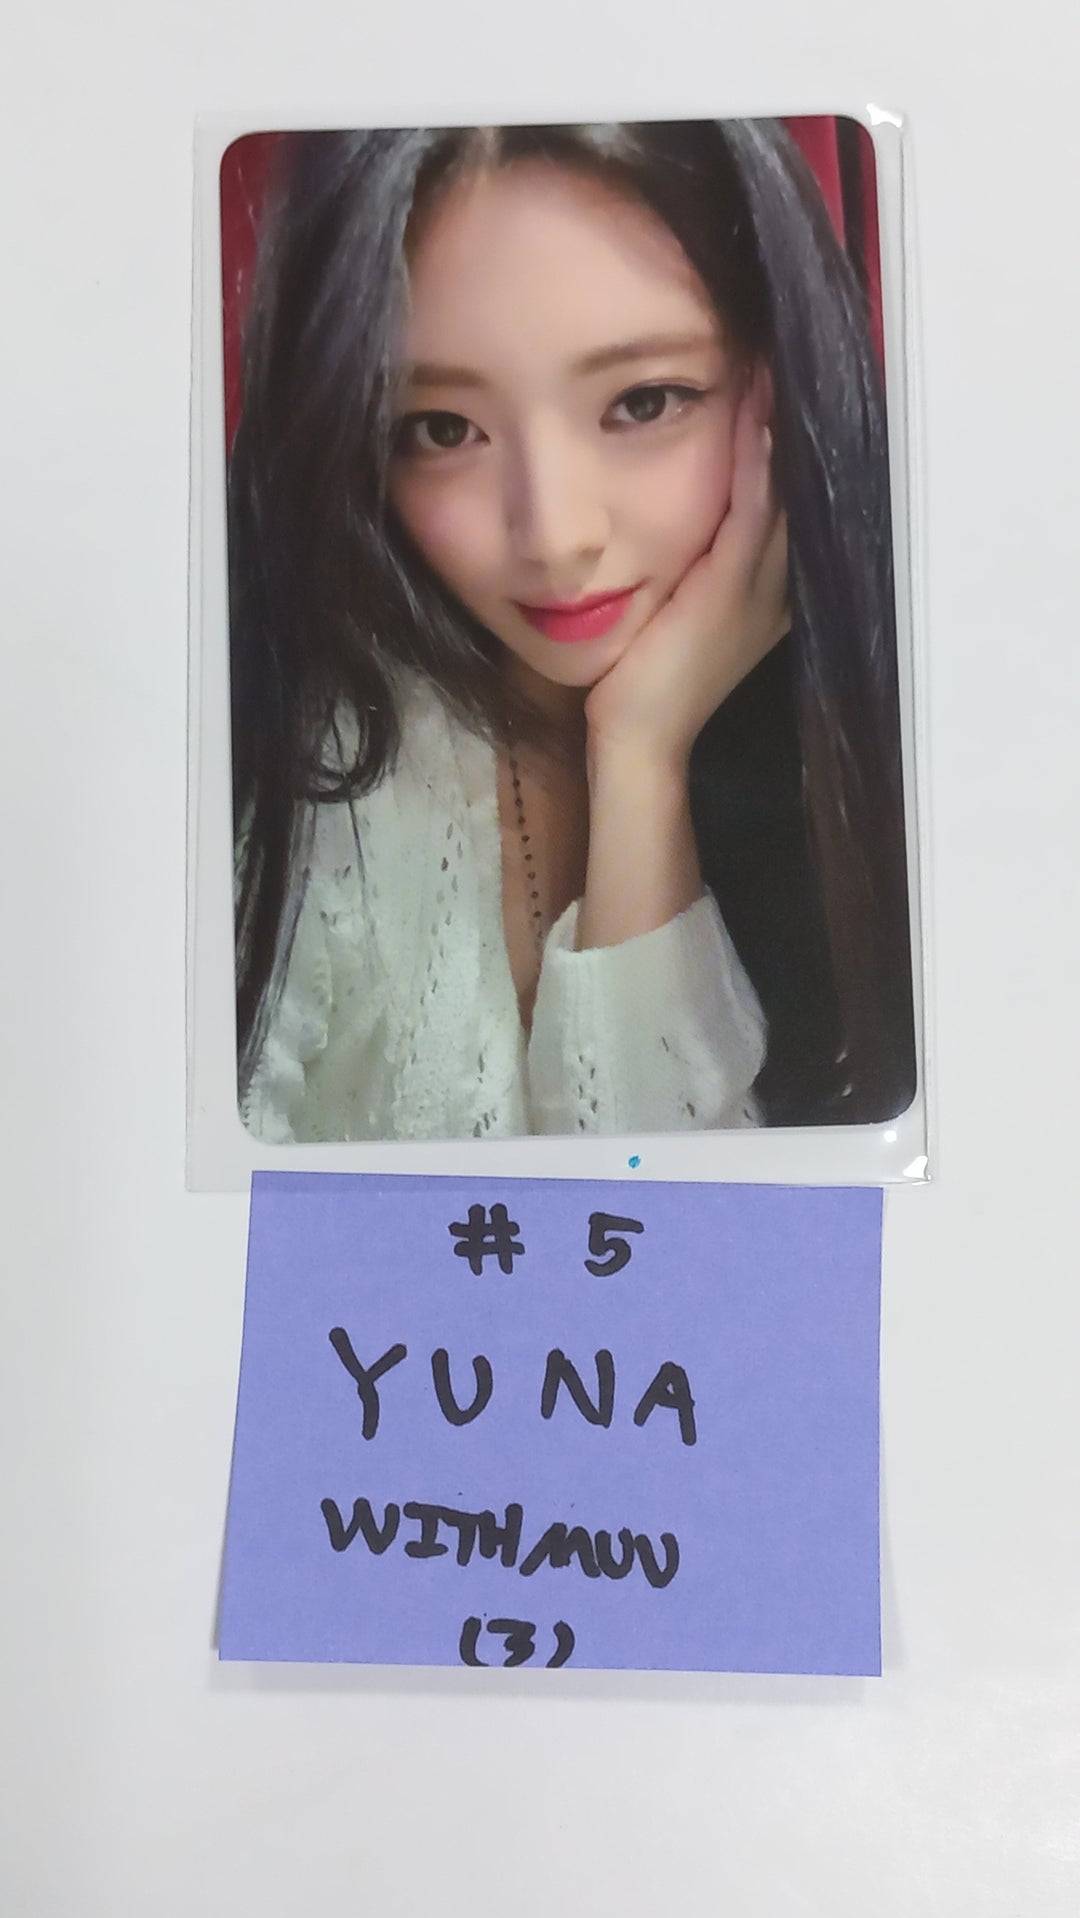 ITZY "KILL MY DOUBT" - Withmuu Fansign Event Photocard Round 7 [23.09.19]